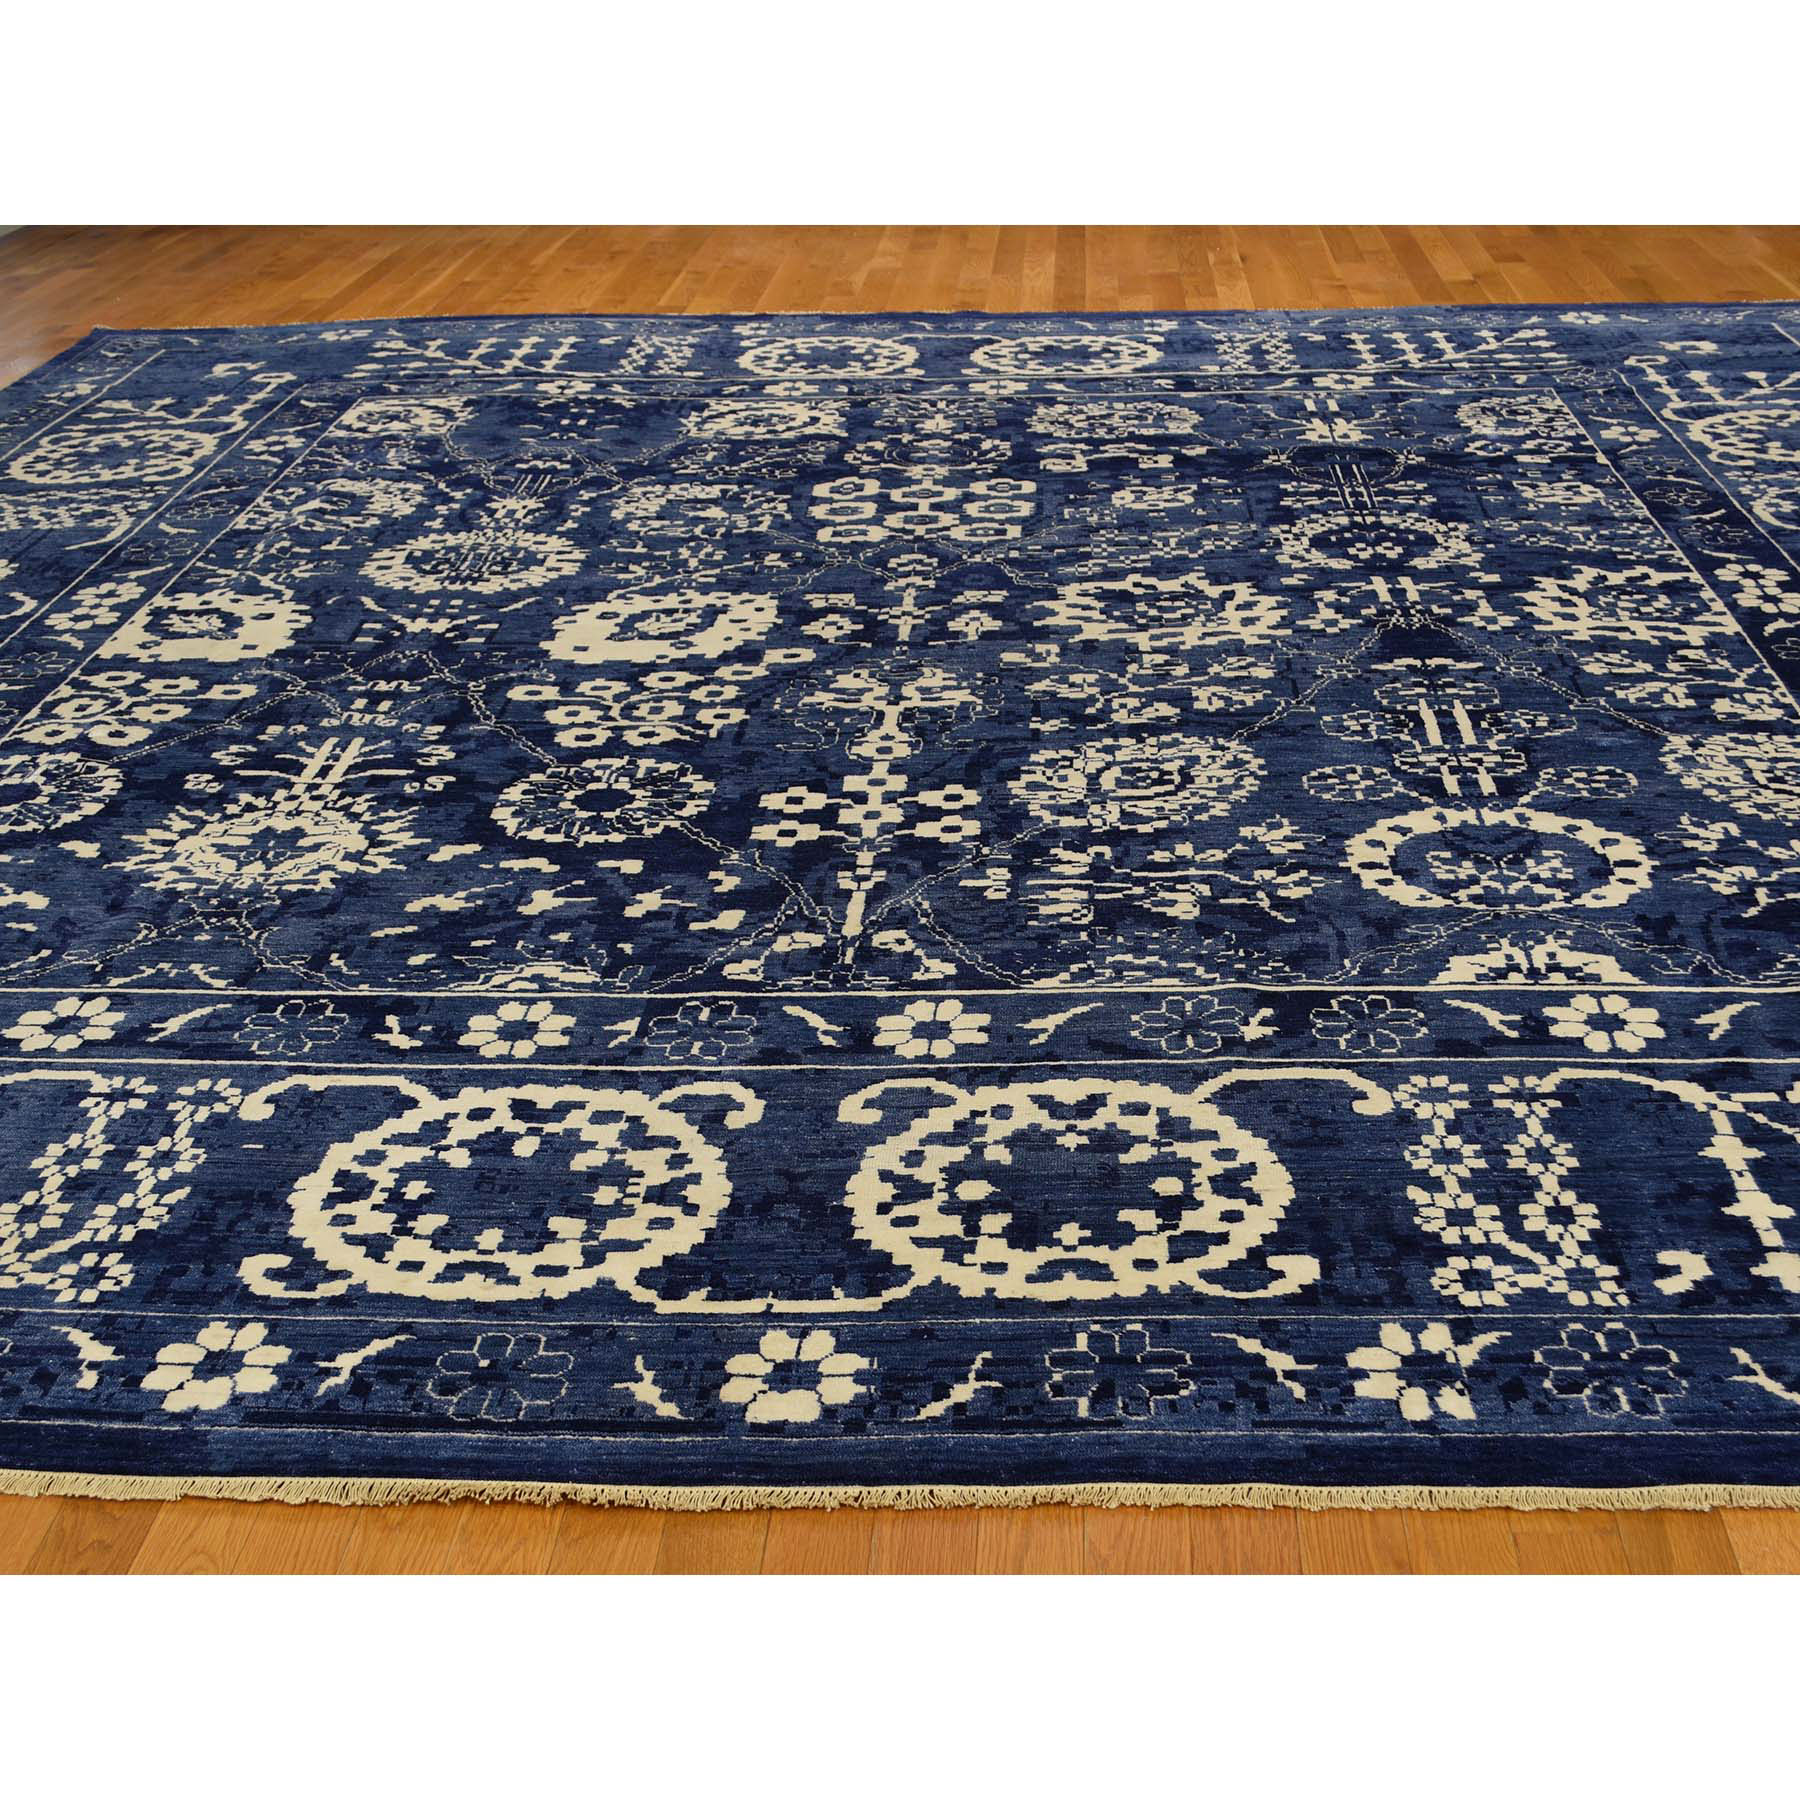 14-2 x14-3  Wool And Silk Hand-Knotted Tone on Tone Tabriz Square Rug 